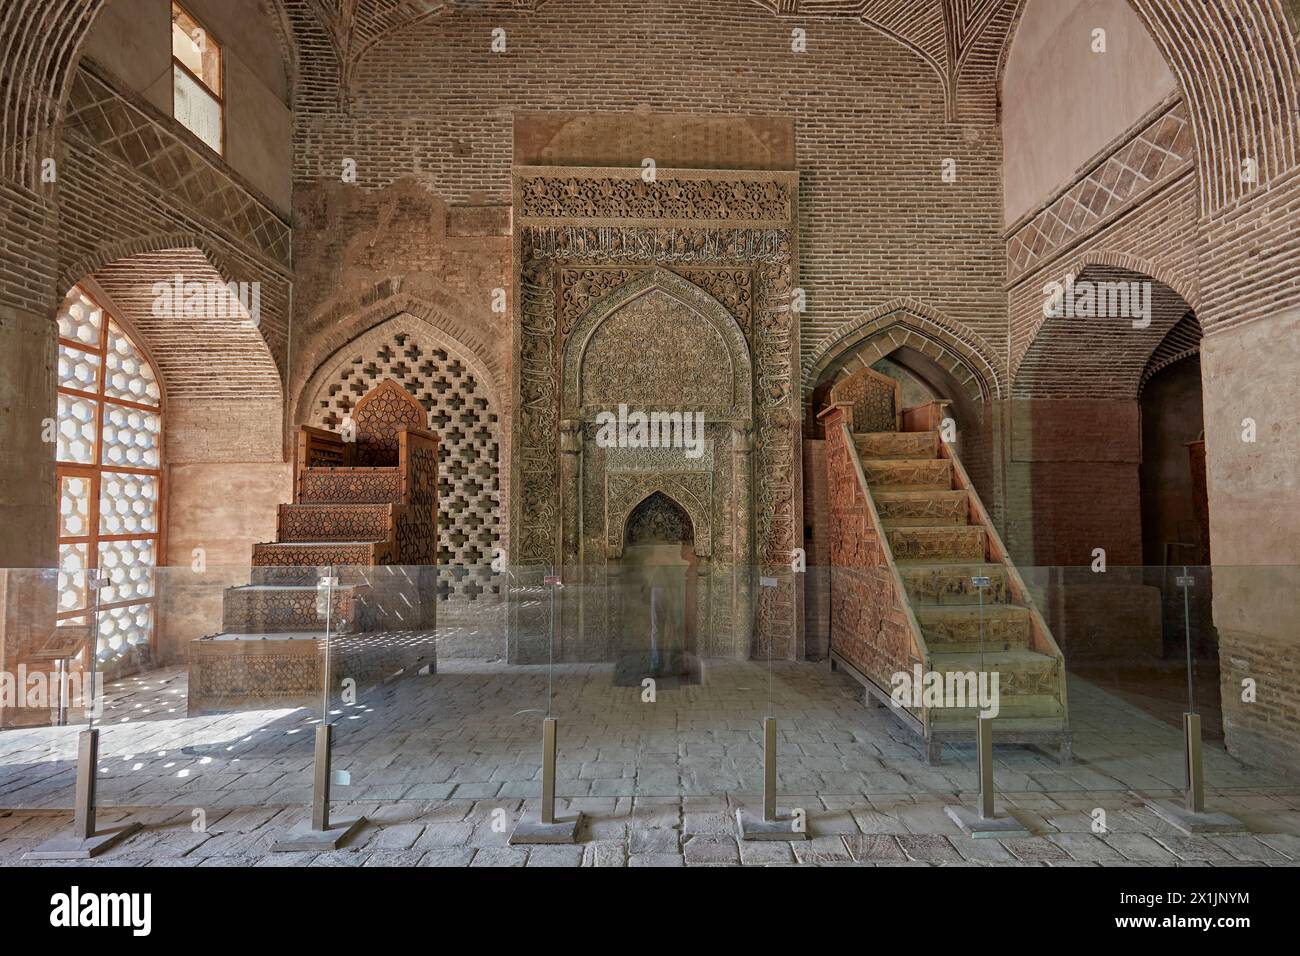 Mihrab (a niche in the wall indicating the direction of Mecca) in the prayer hall of Jameh Mosque (8th century). Isfahan, Iran. Stock Photo